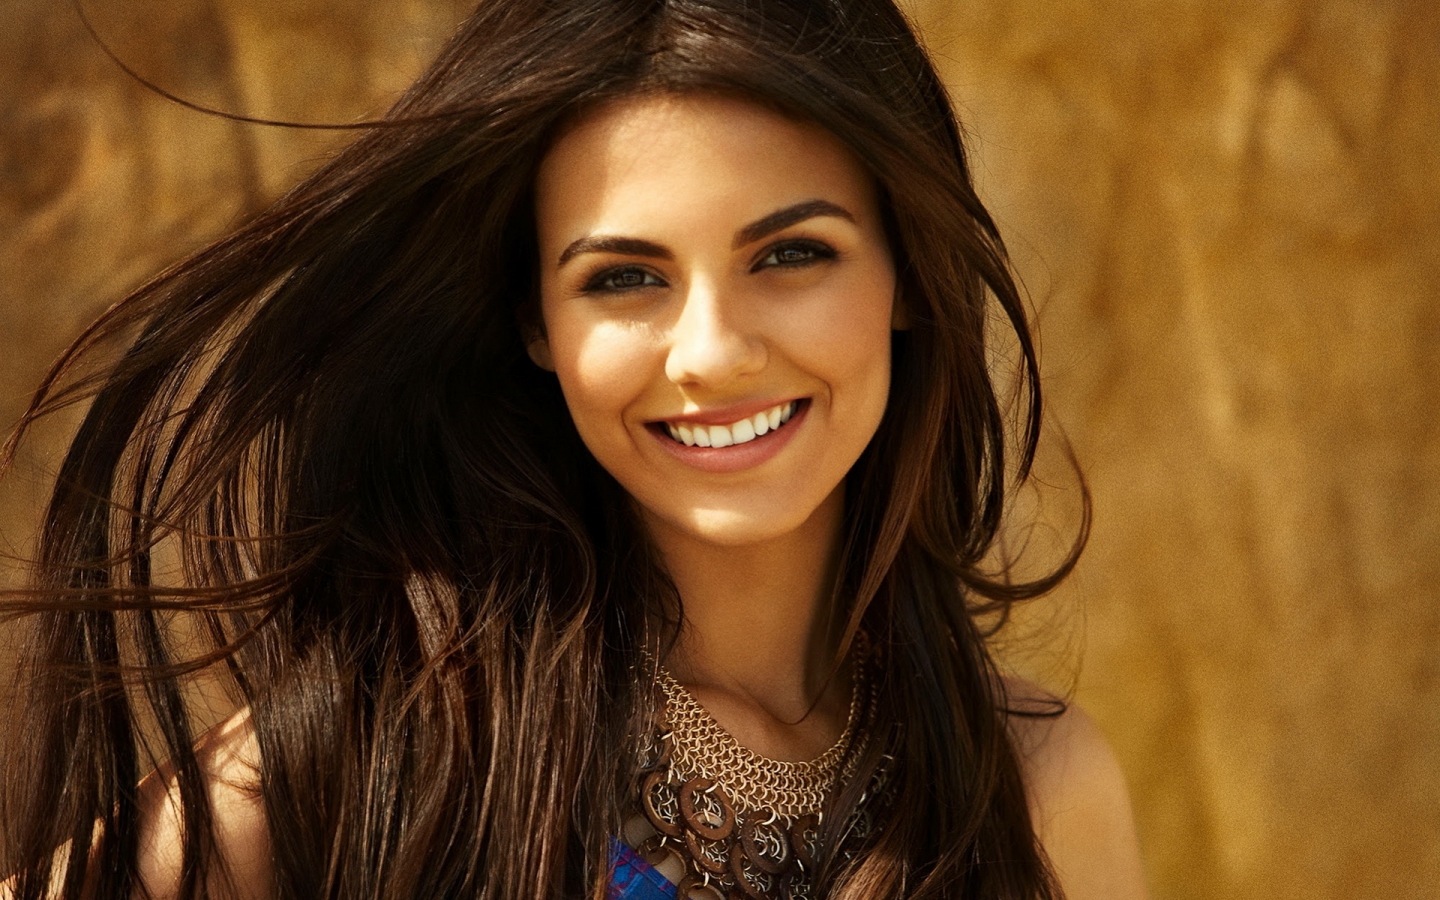 Cute Smile of Victoria Justice for 1440 x 900 widescreen resolution